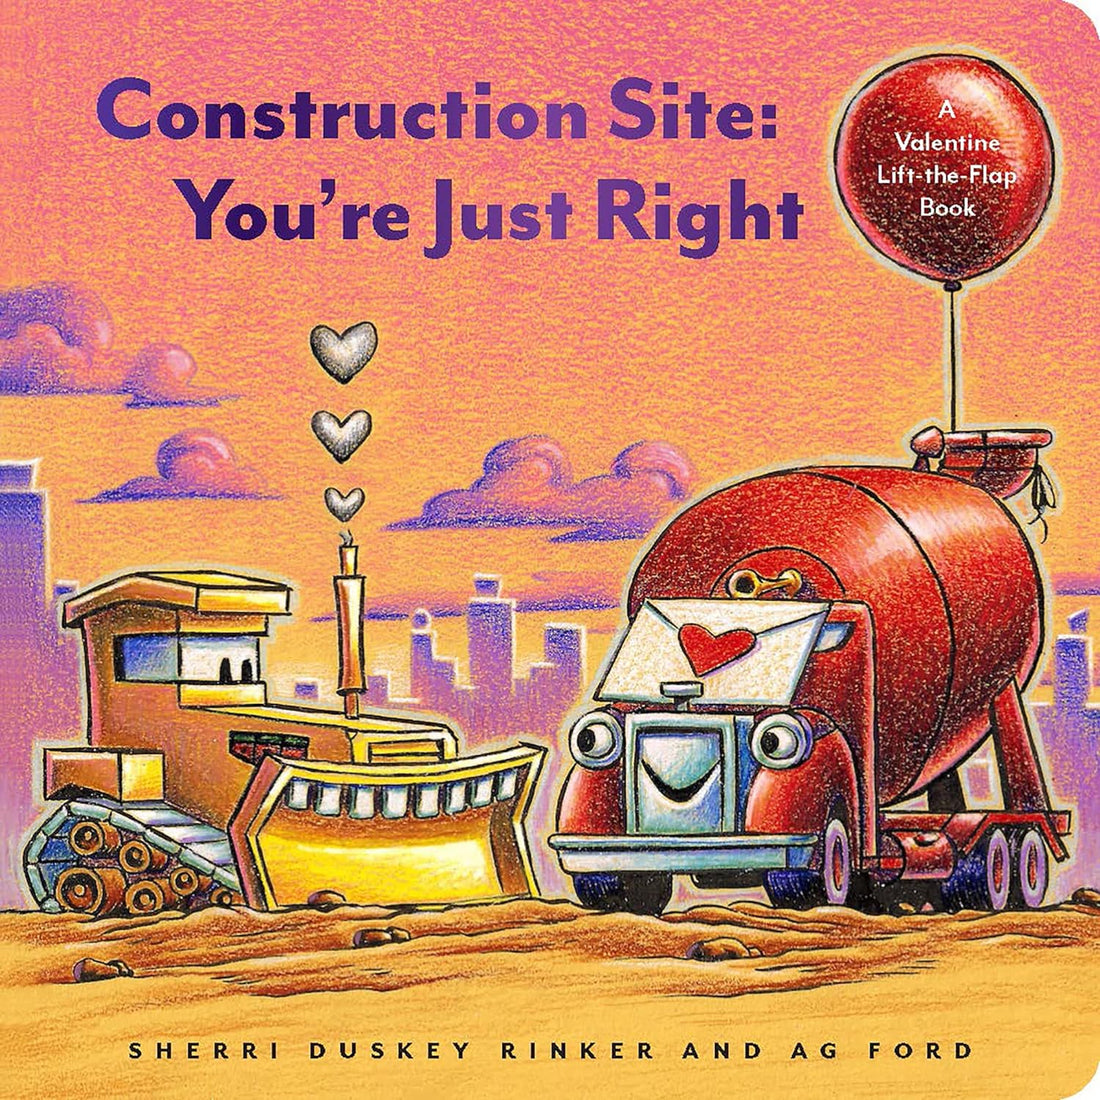 Construction Site: You’re Just Right by Sherri Duskey Rinker